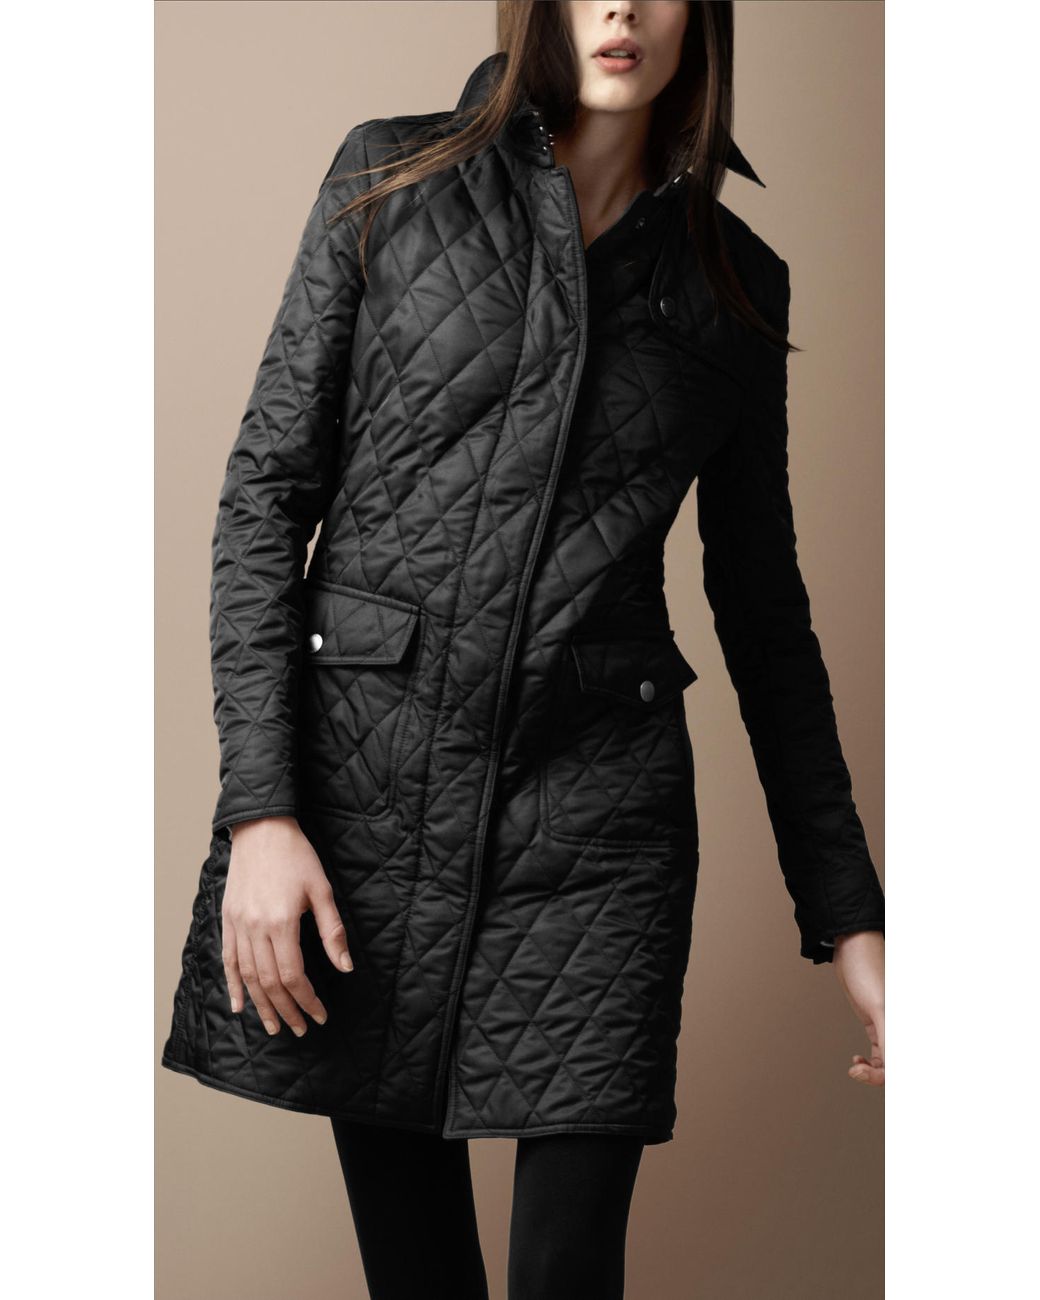 Burberry Brit Diamond Quilted Trench Coat in Black | Lyst UK